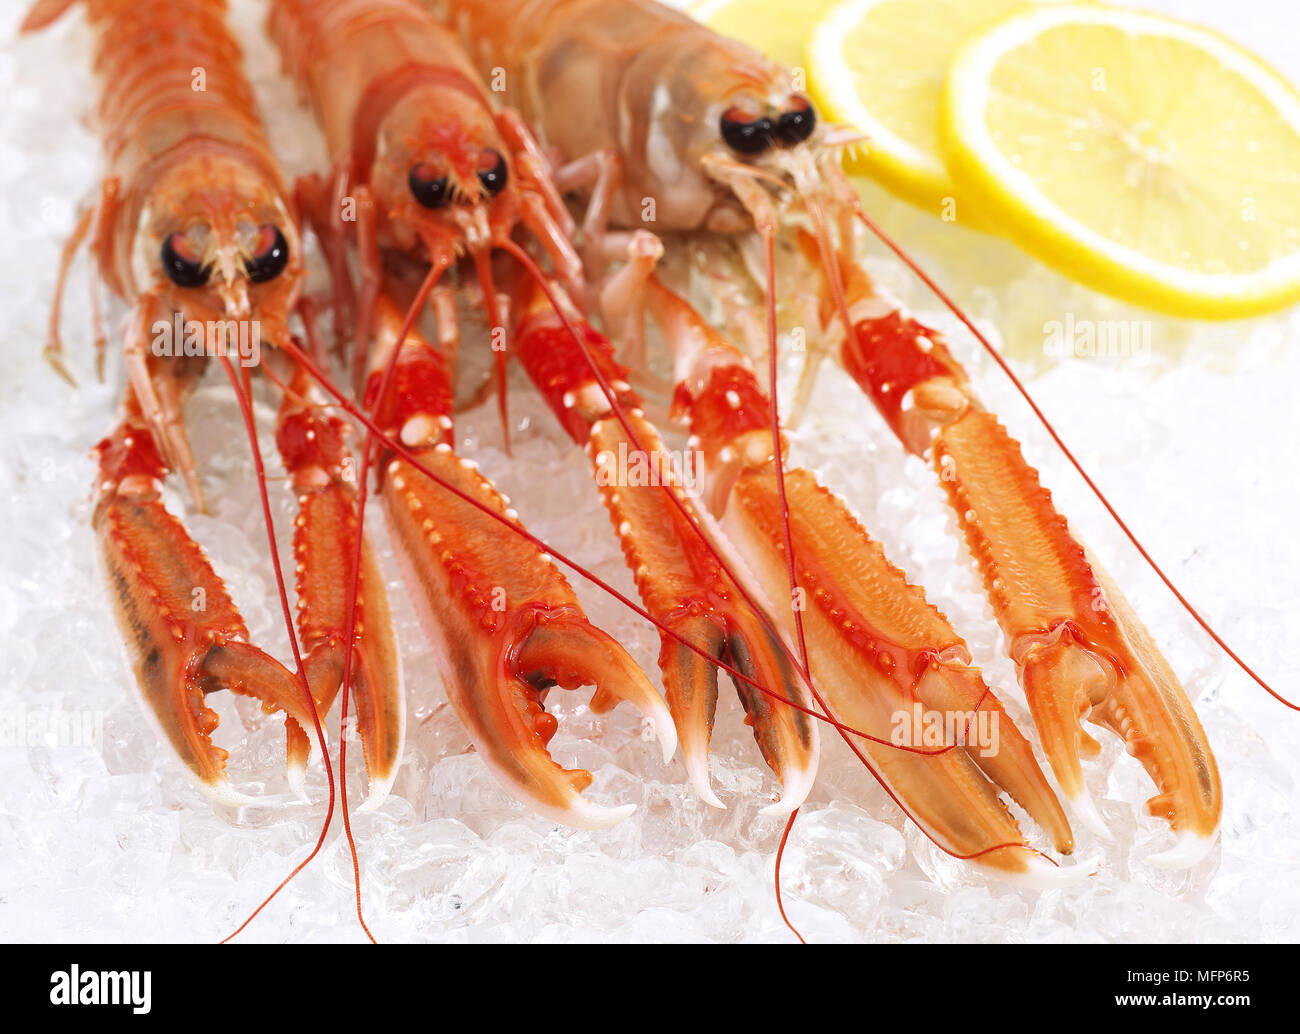 Dublin Bay Prawn or Norway Lobster or Scampi, nephrops norvegicus, Crustacean and Lemon on Ice Stock Photo